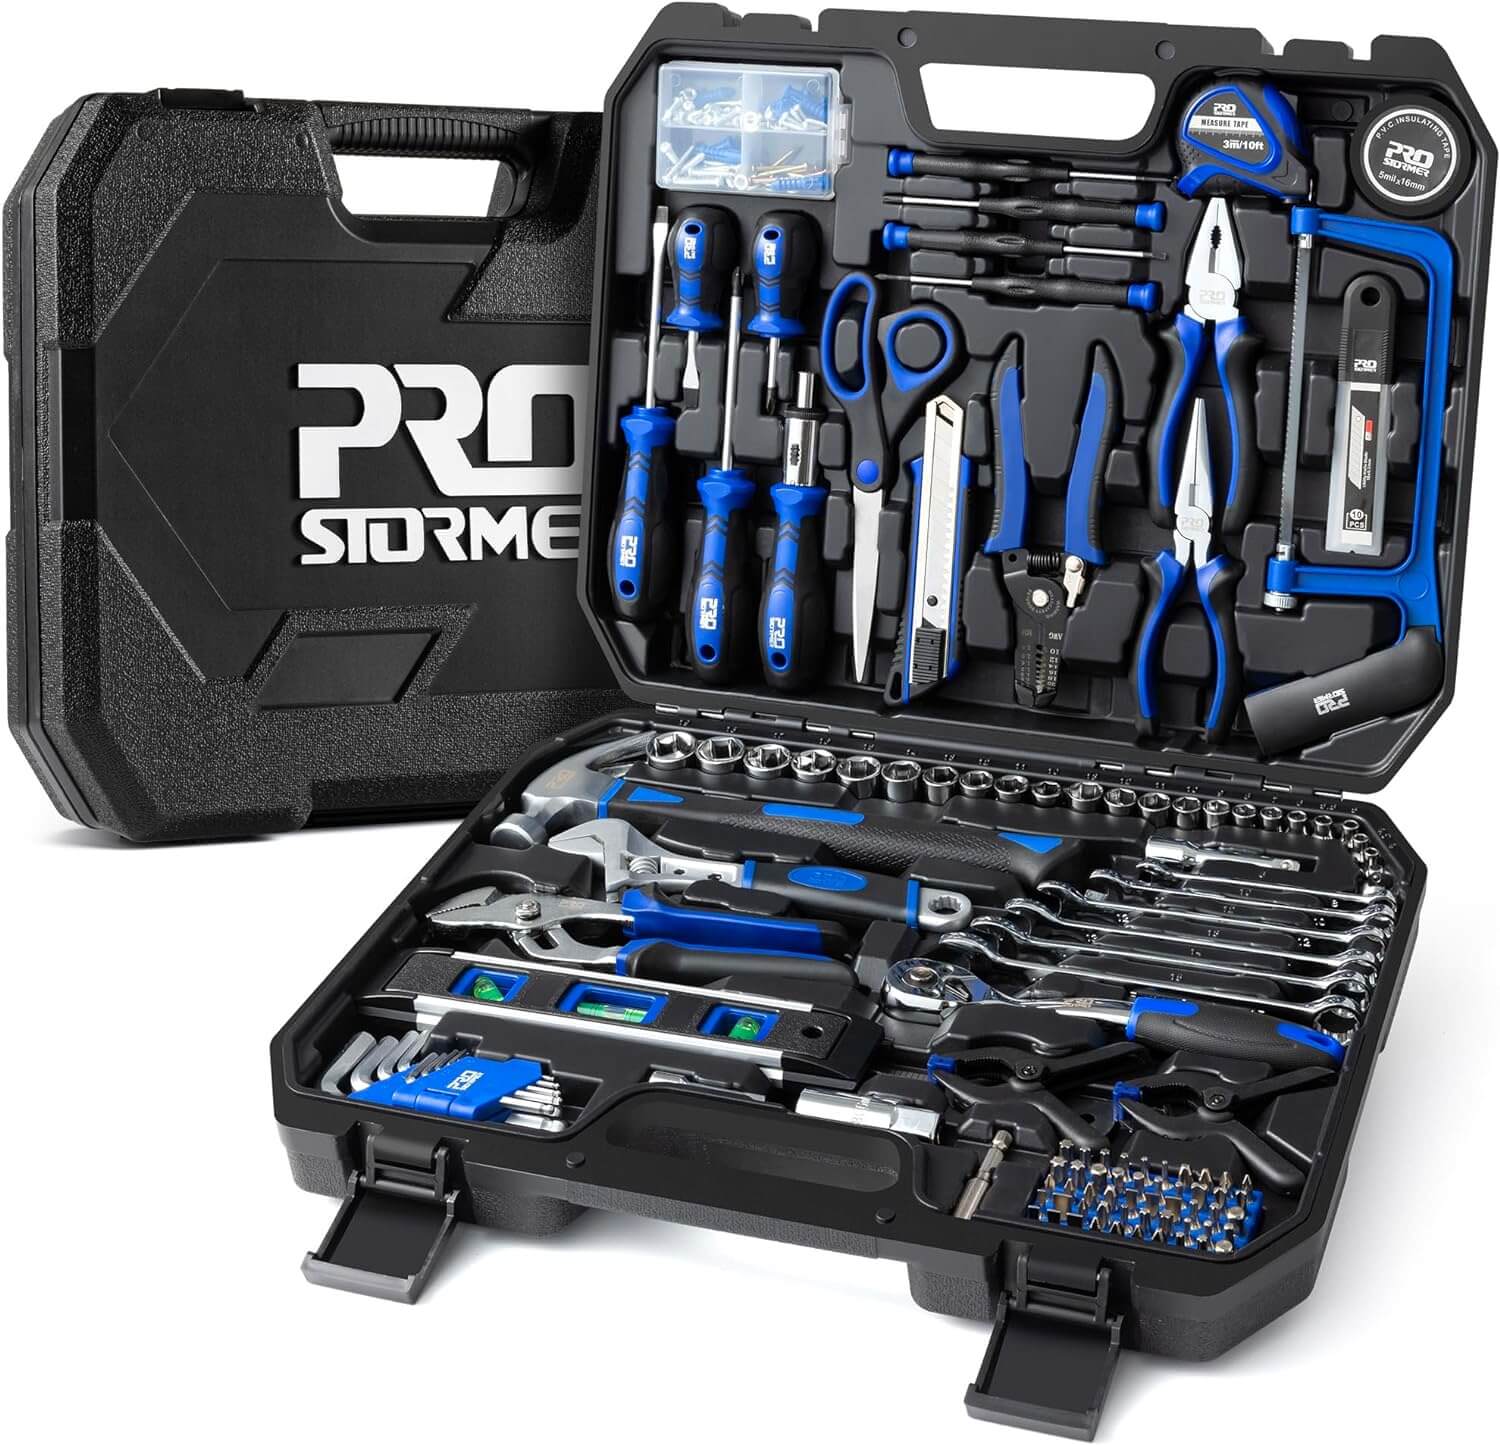 Prostormer 259-Piece Tool Set, General Home/Auto Repair Tool Kit with Plastic Storage Toolbox, Complete Household Tool Box with Essential Tools for Men and...
